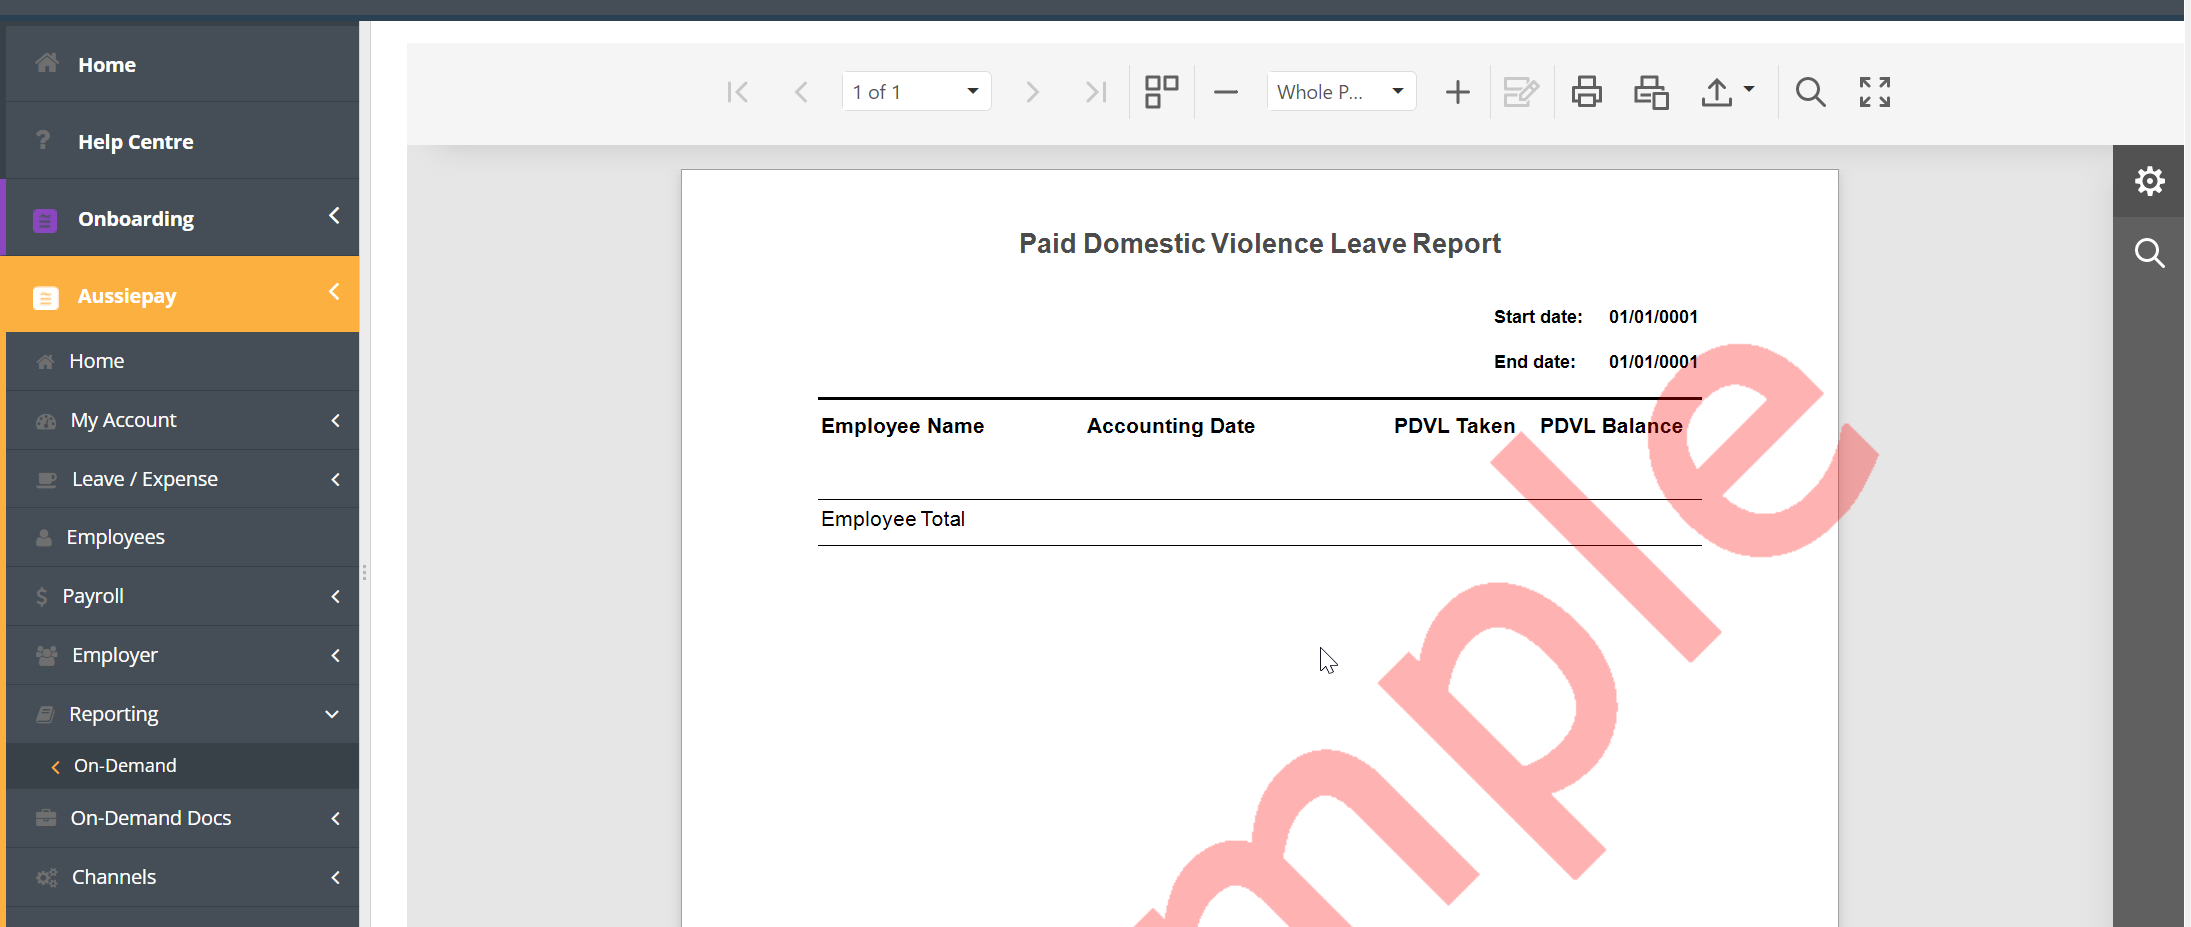 View the Paid Domestic Violence Leave Report